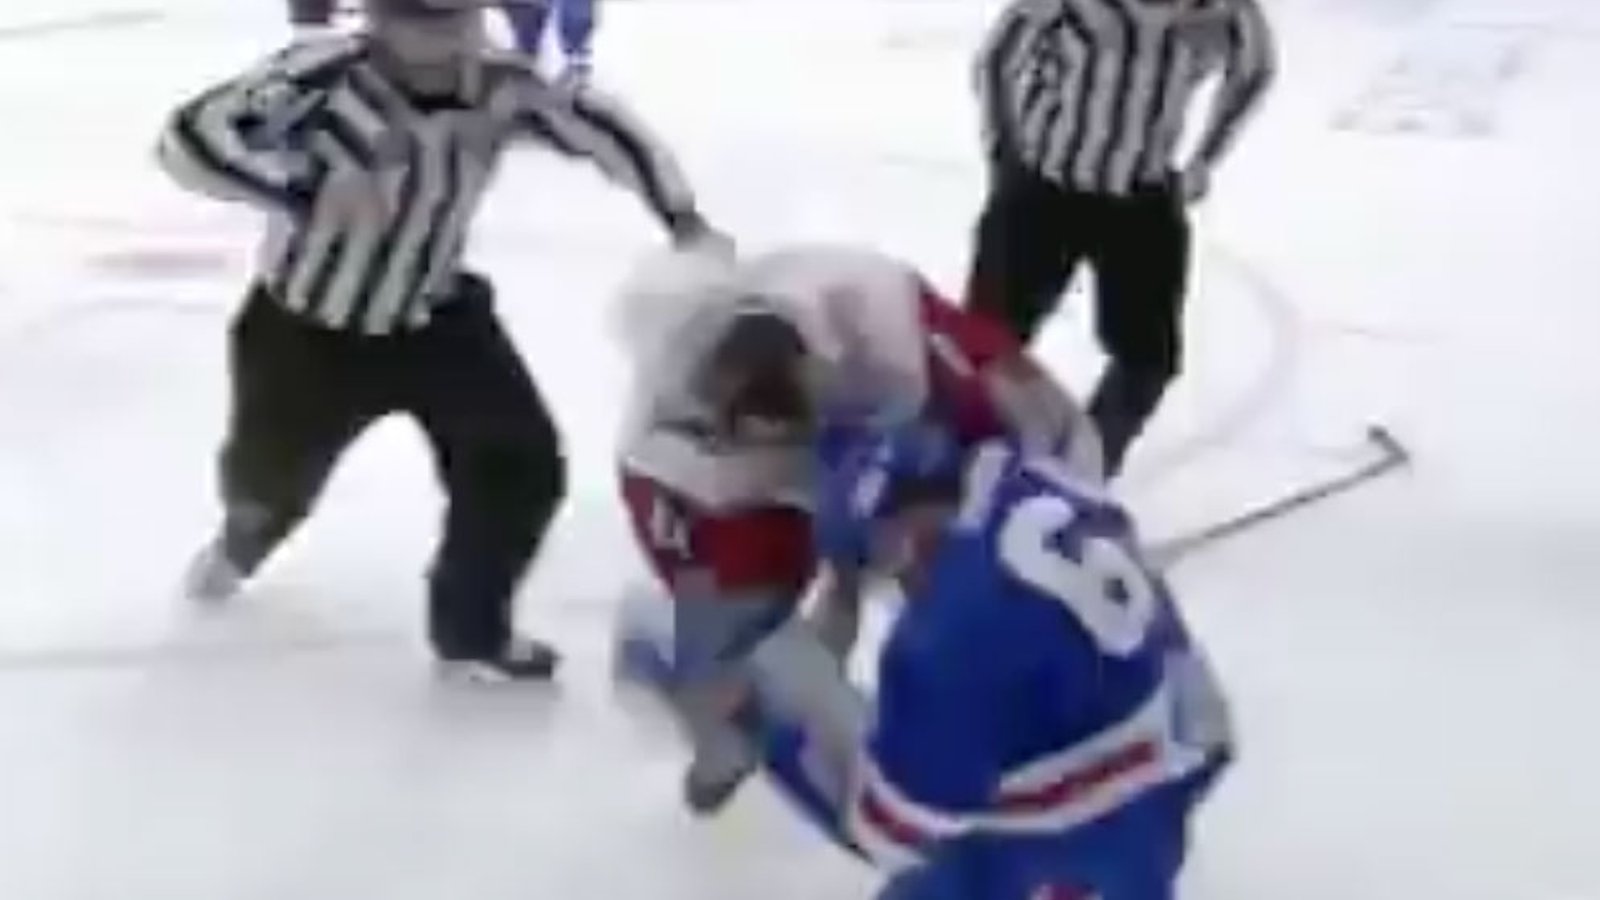 Nail Yakupov gets manhandled in epic KHL fight! 